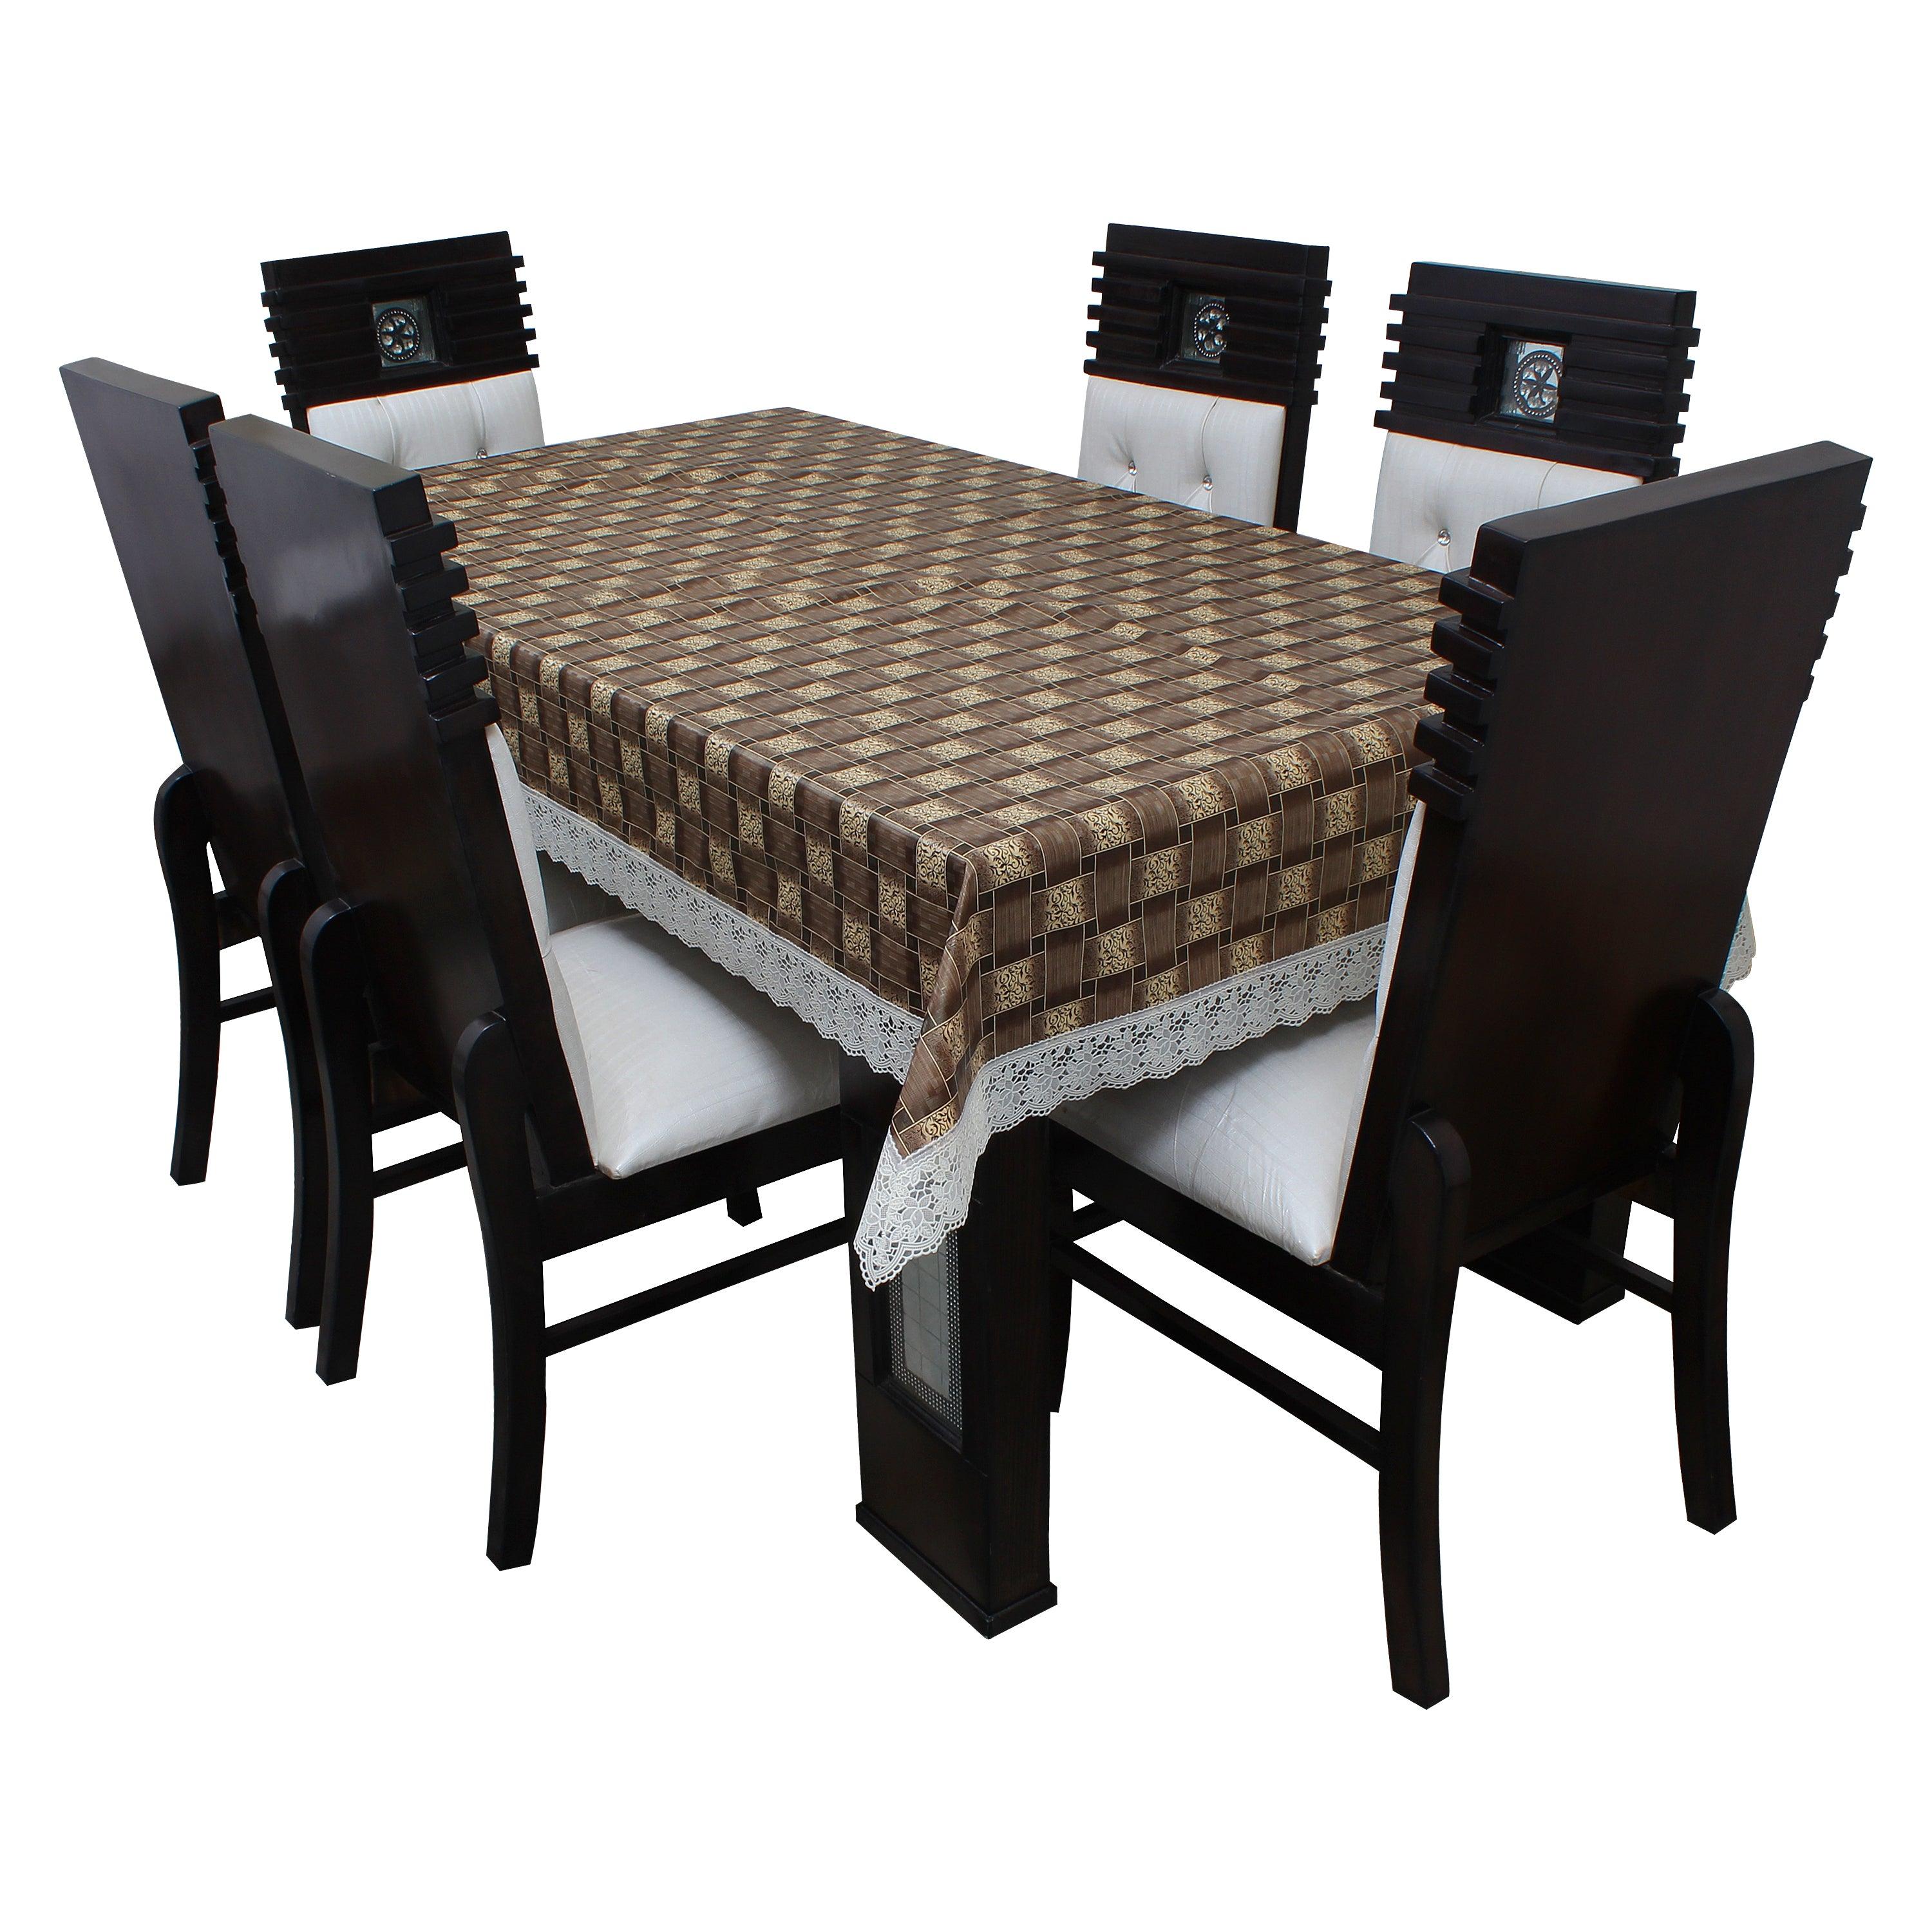 Waterproof and Dustproof Dining Table Cover, SA40 - Dream Care Furnishings Private Limited